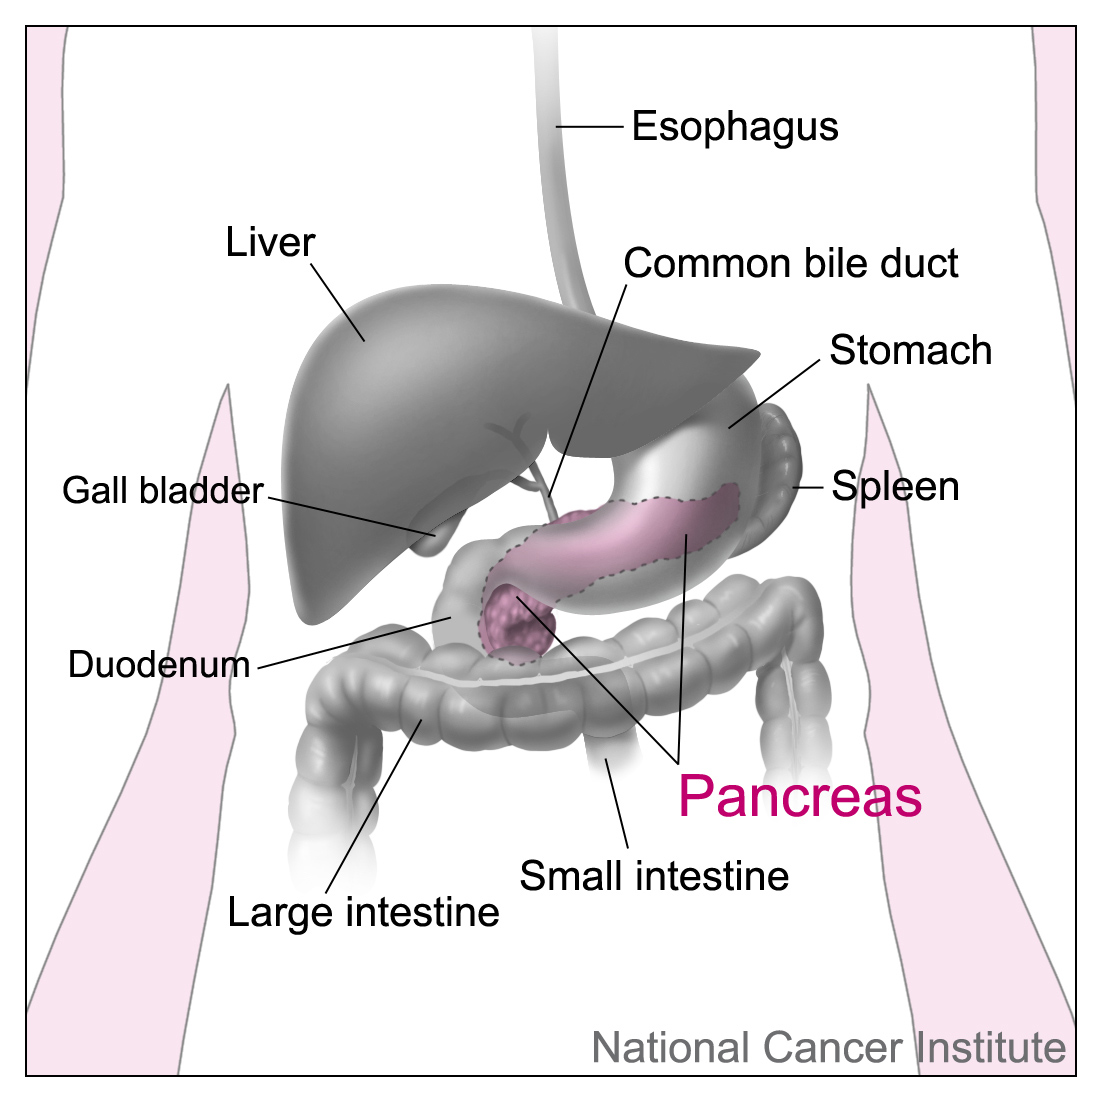 anatomy of the pancreas and surrounding organs - diagram used to illustrate diagnosing pancreatic cancer with endoscopic ultrasound (EUS)